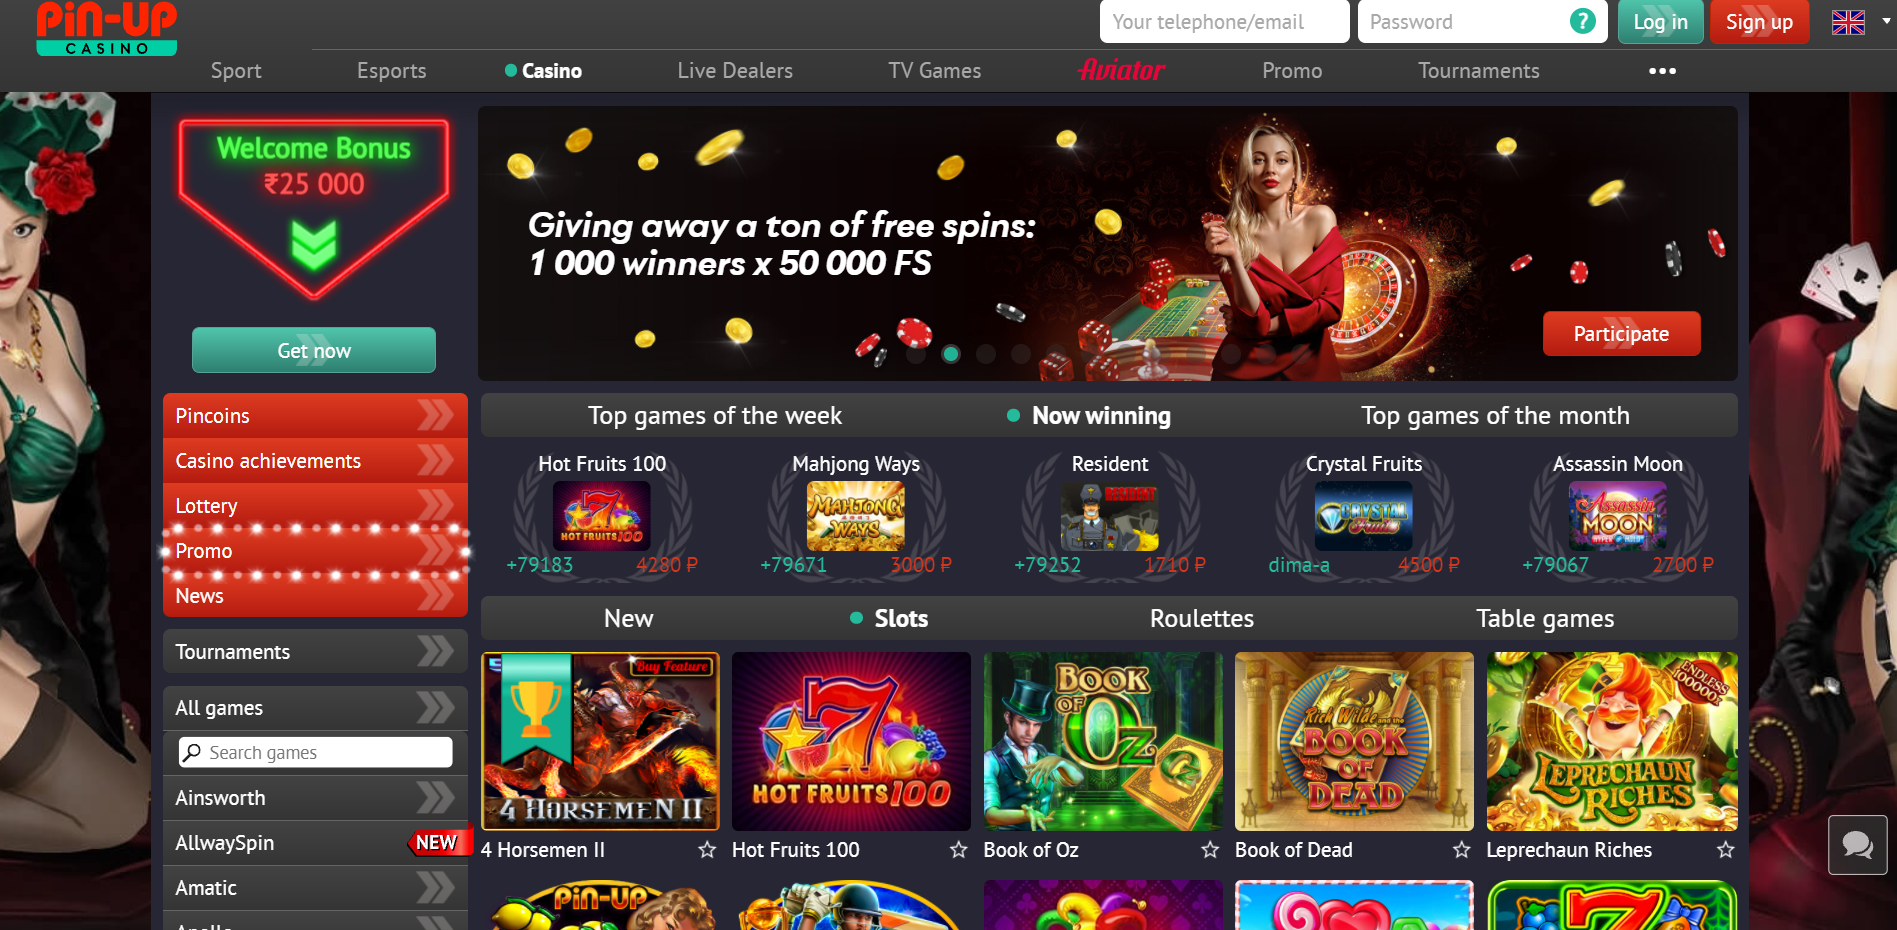 Best Gambling Affiliate Networks - pin-up